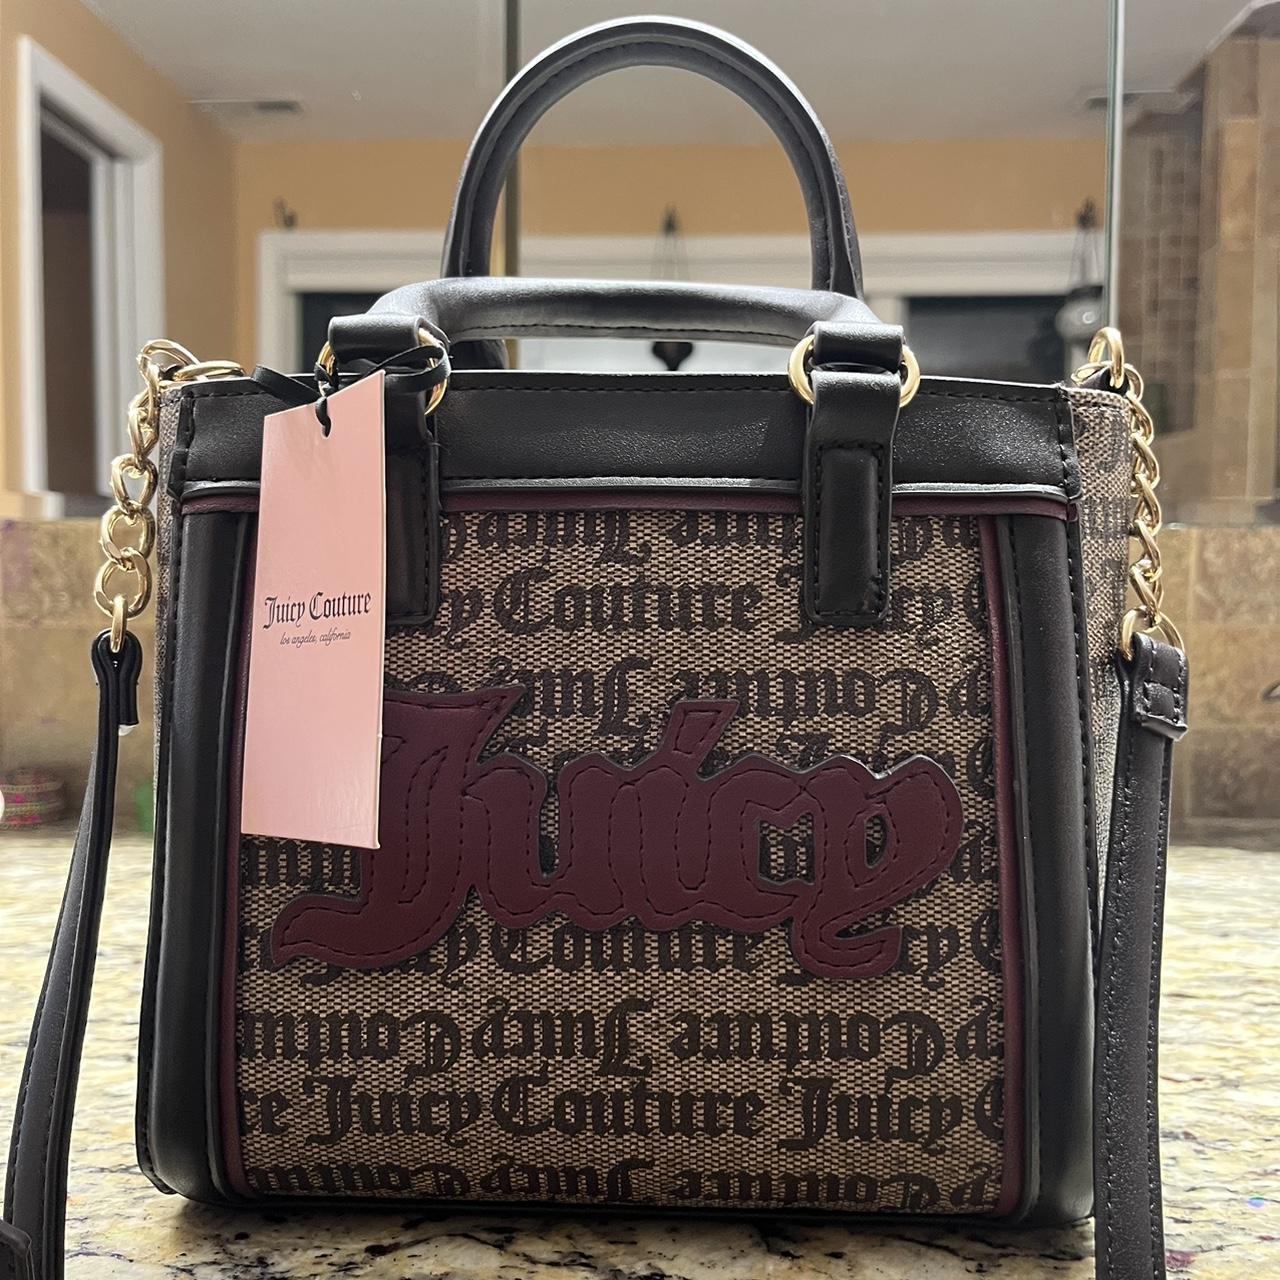 Juicy Couture Brown Leather Handbag Gold Chain Retro Hobo Purse Charm  Tassel Y2K - $80 - From Stephani